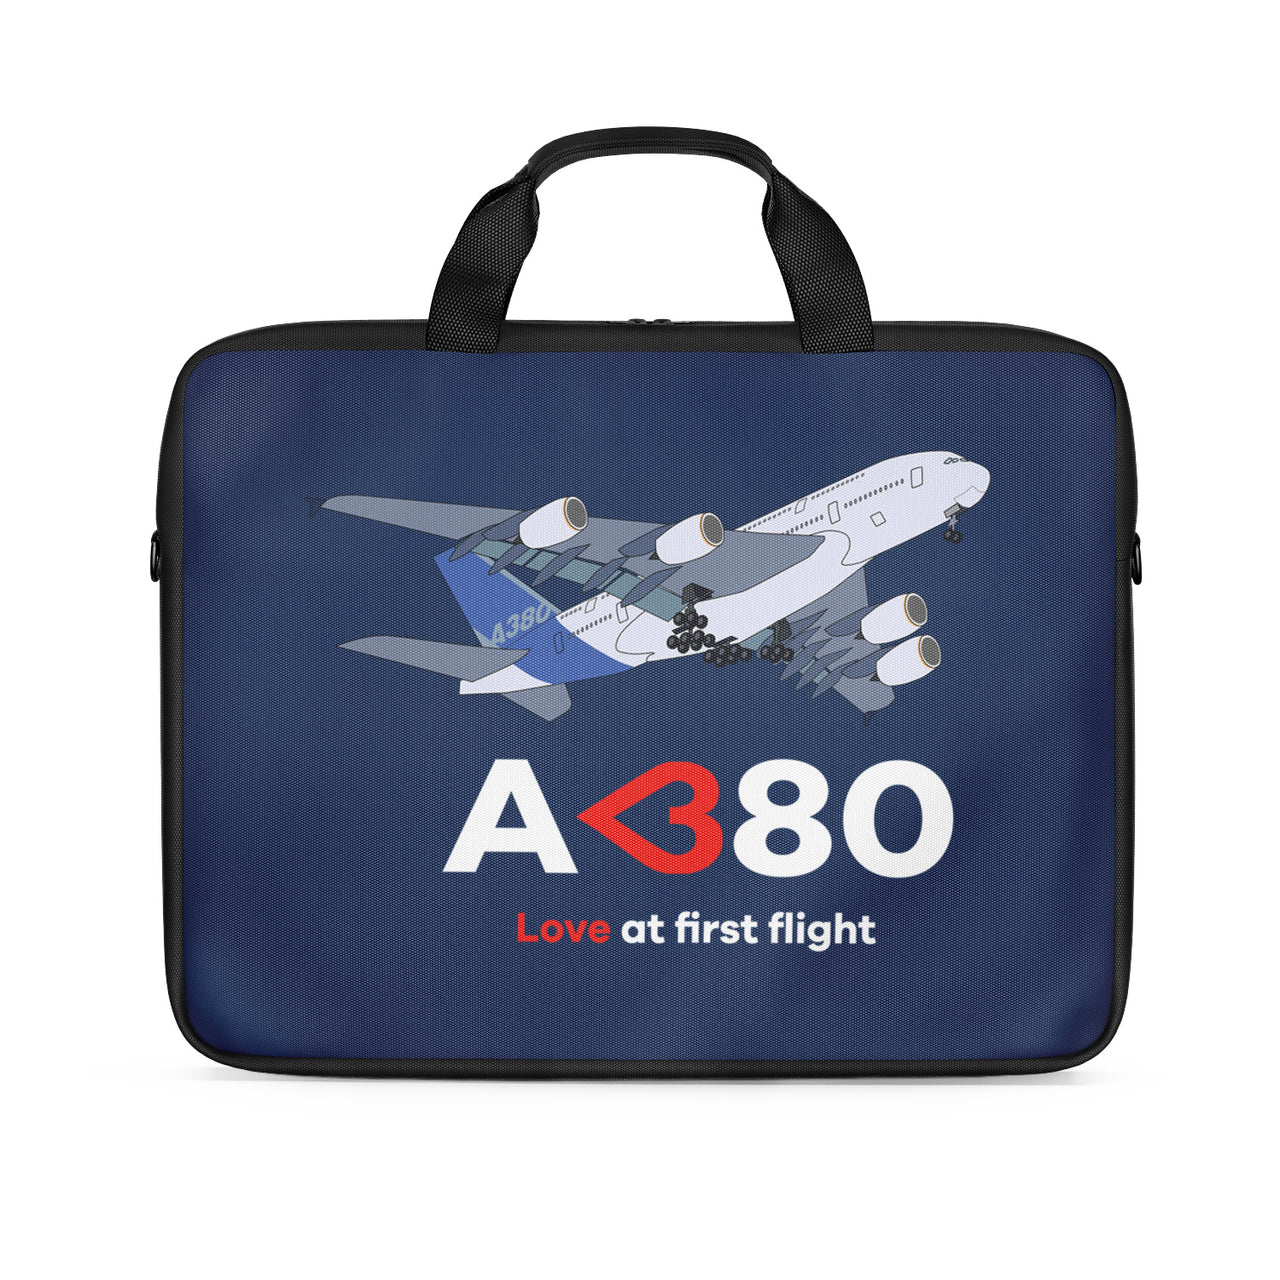 Airbus A380 Love at first flight Designed Laptop & Tablet Bags